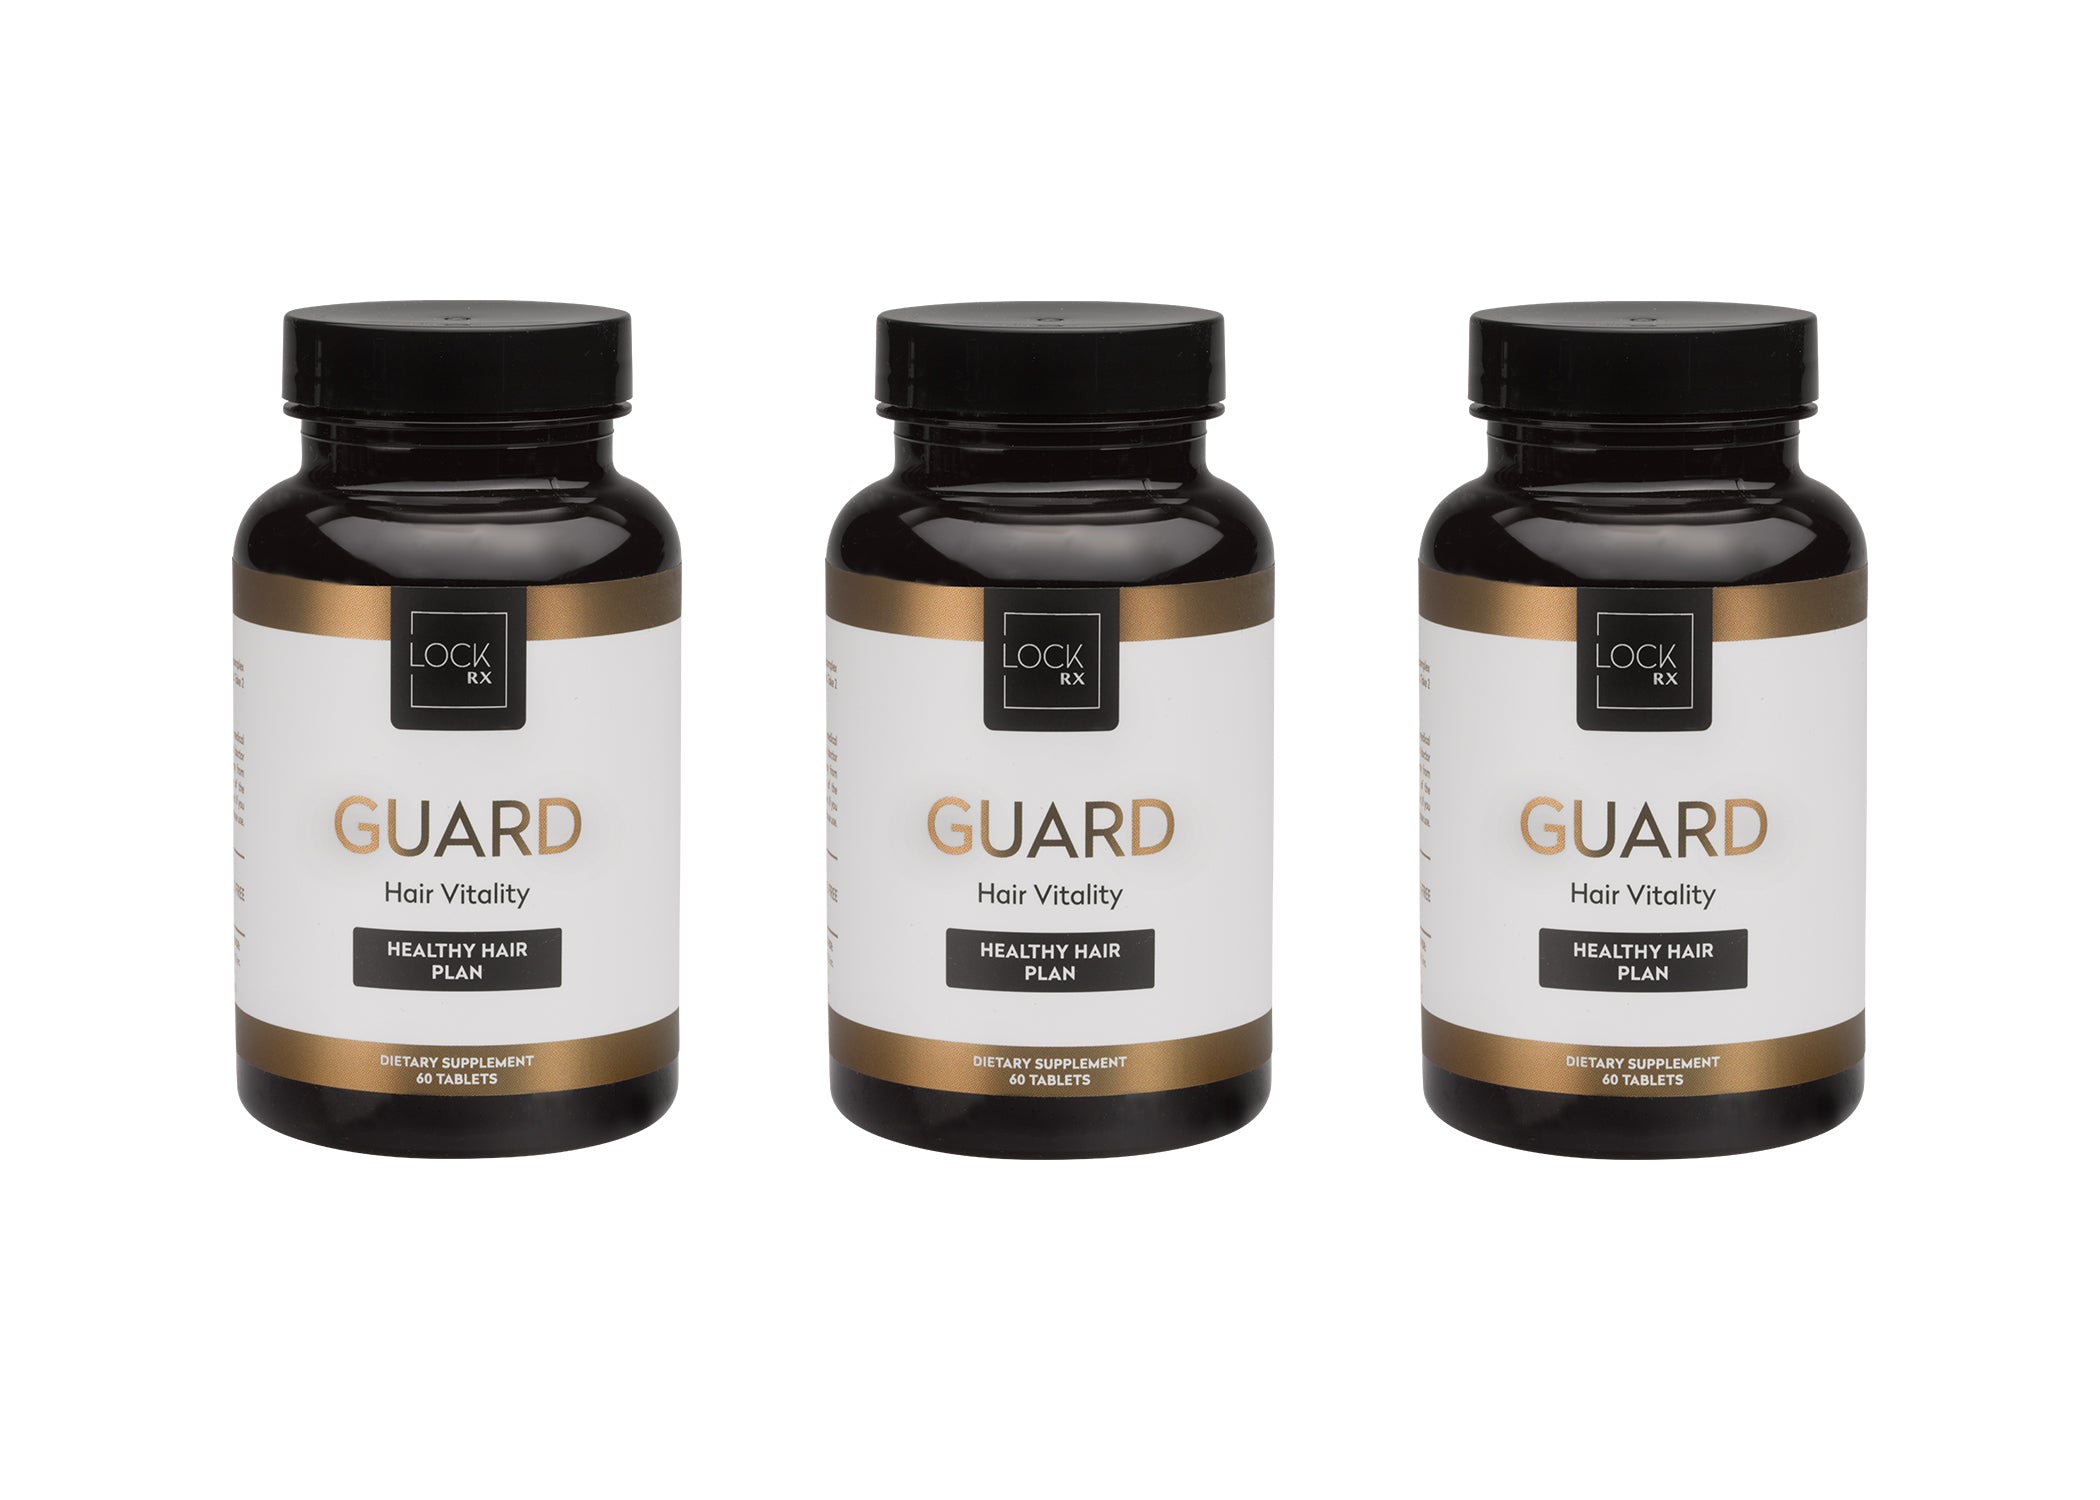 GUARD 3 month supply